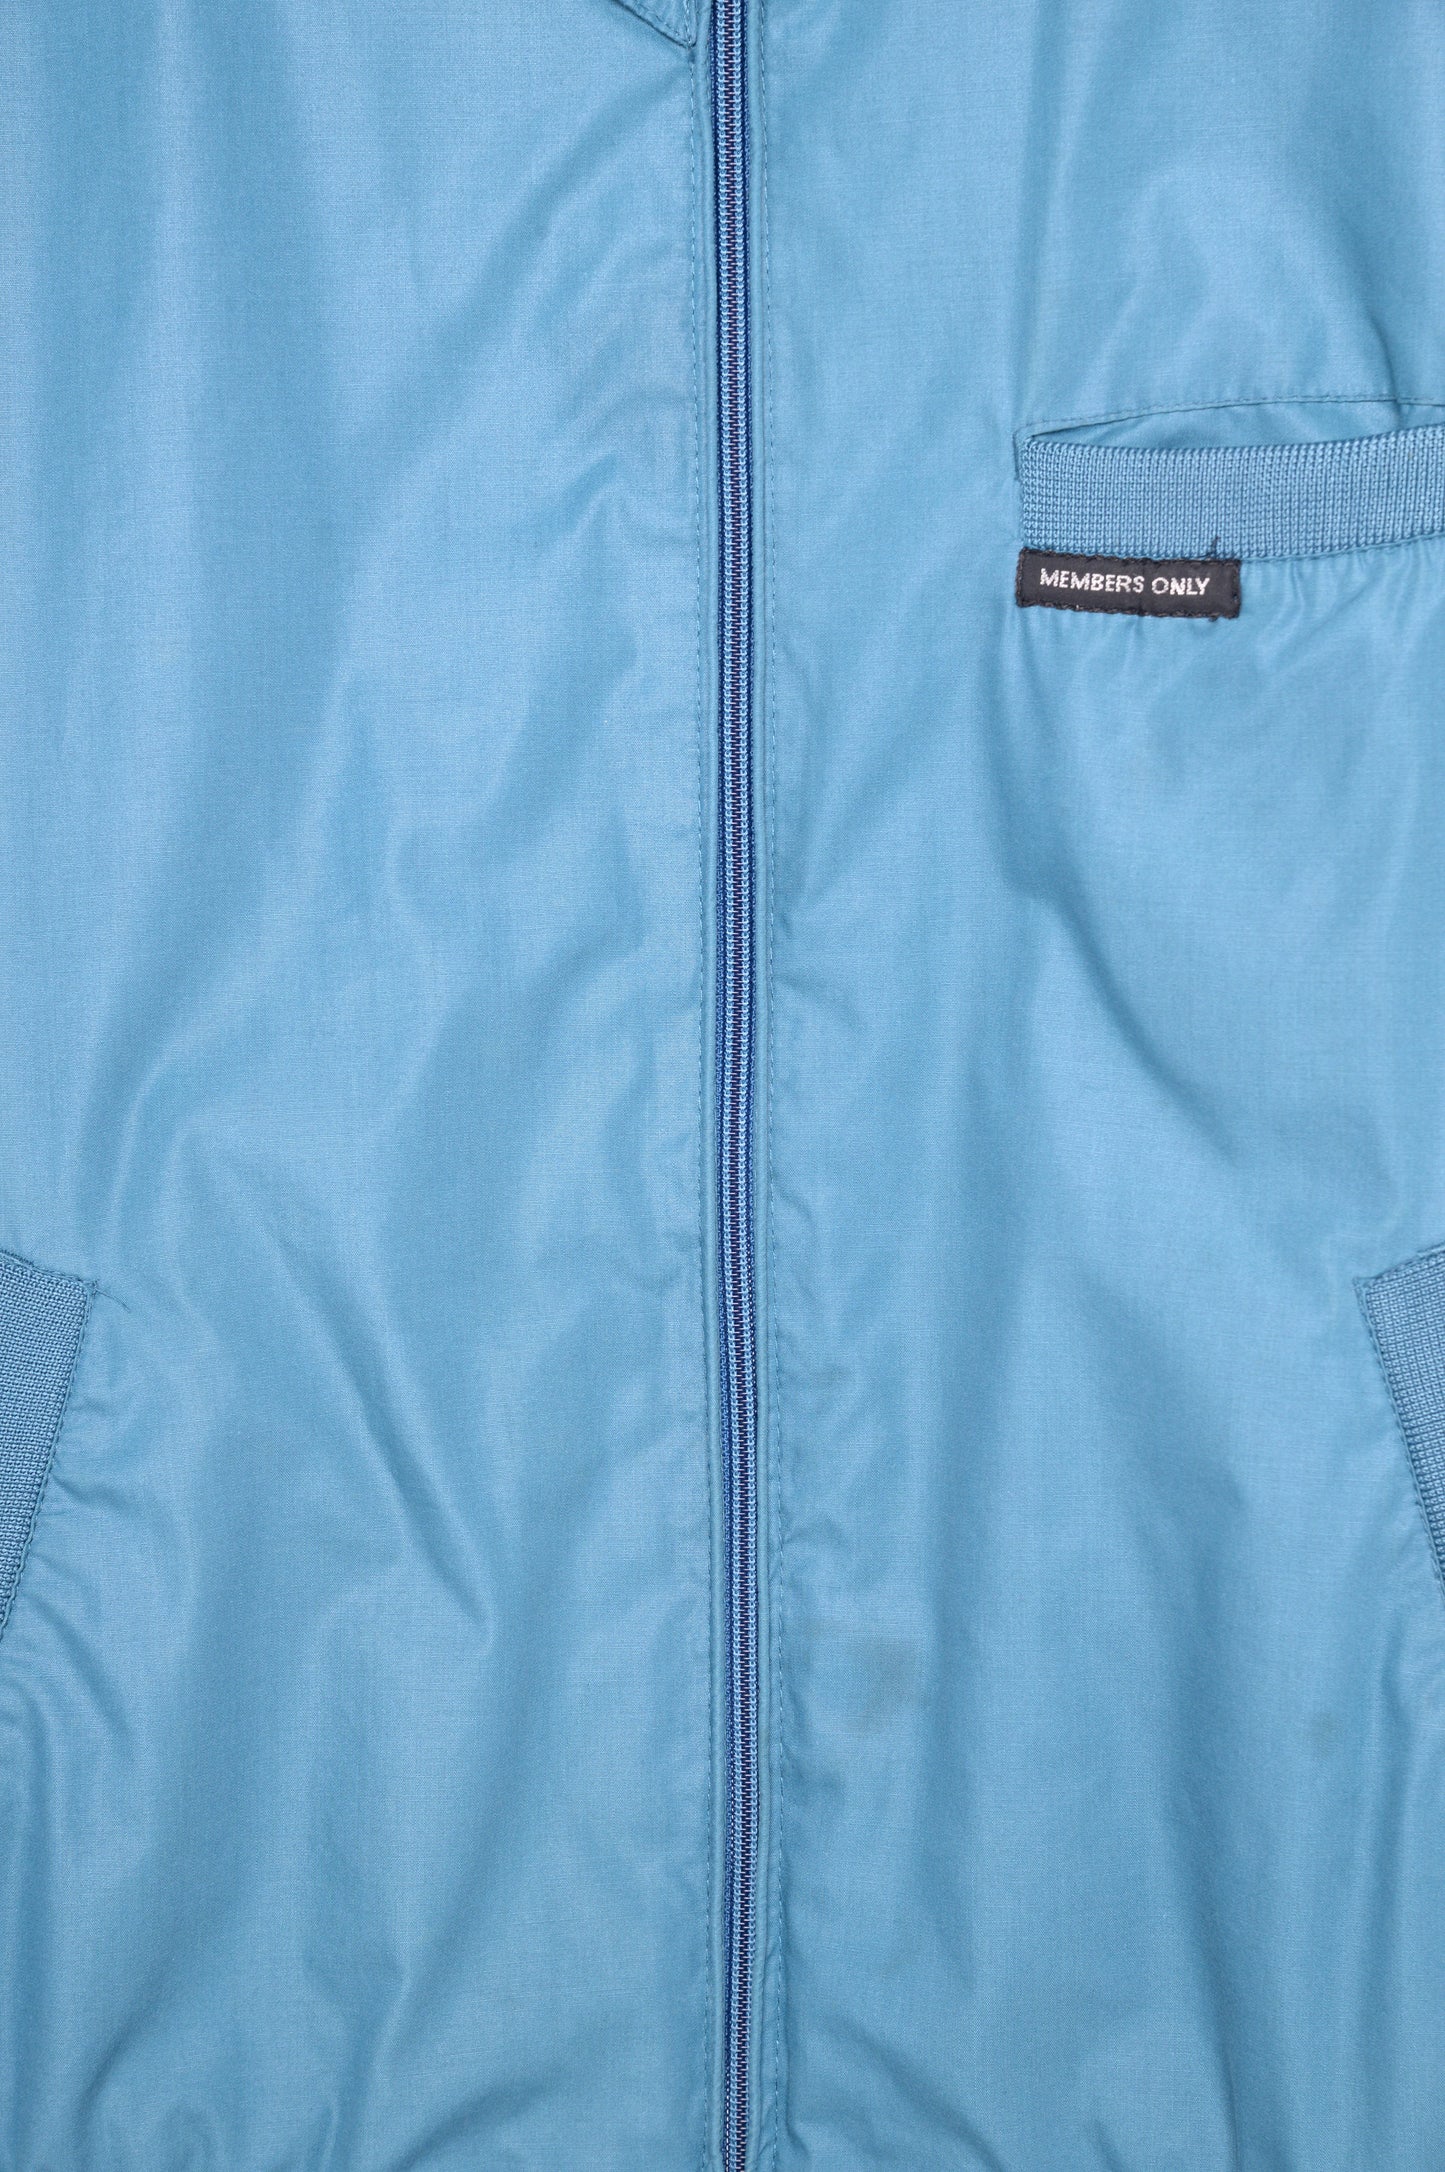 Baby Blue Member's Only Jacket